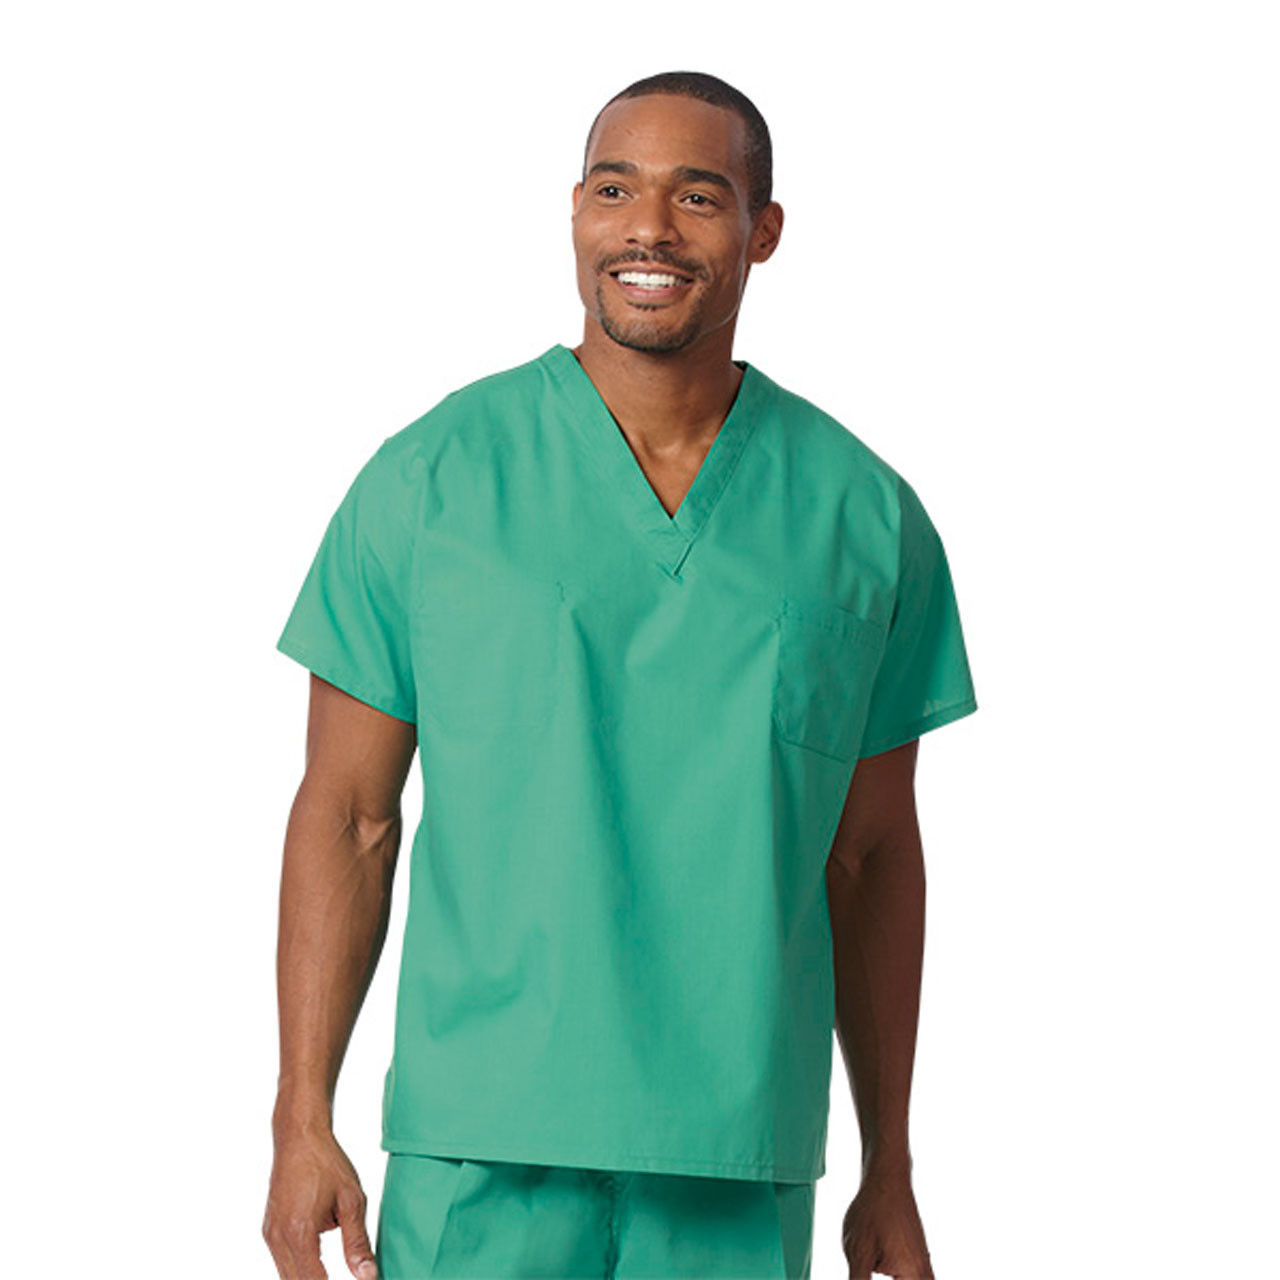 What material are the reversible scrubs made of?